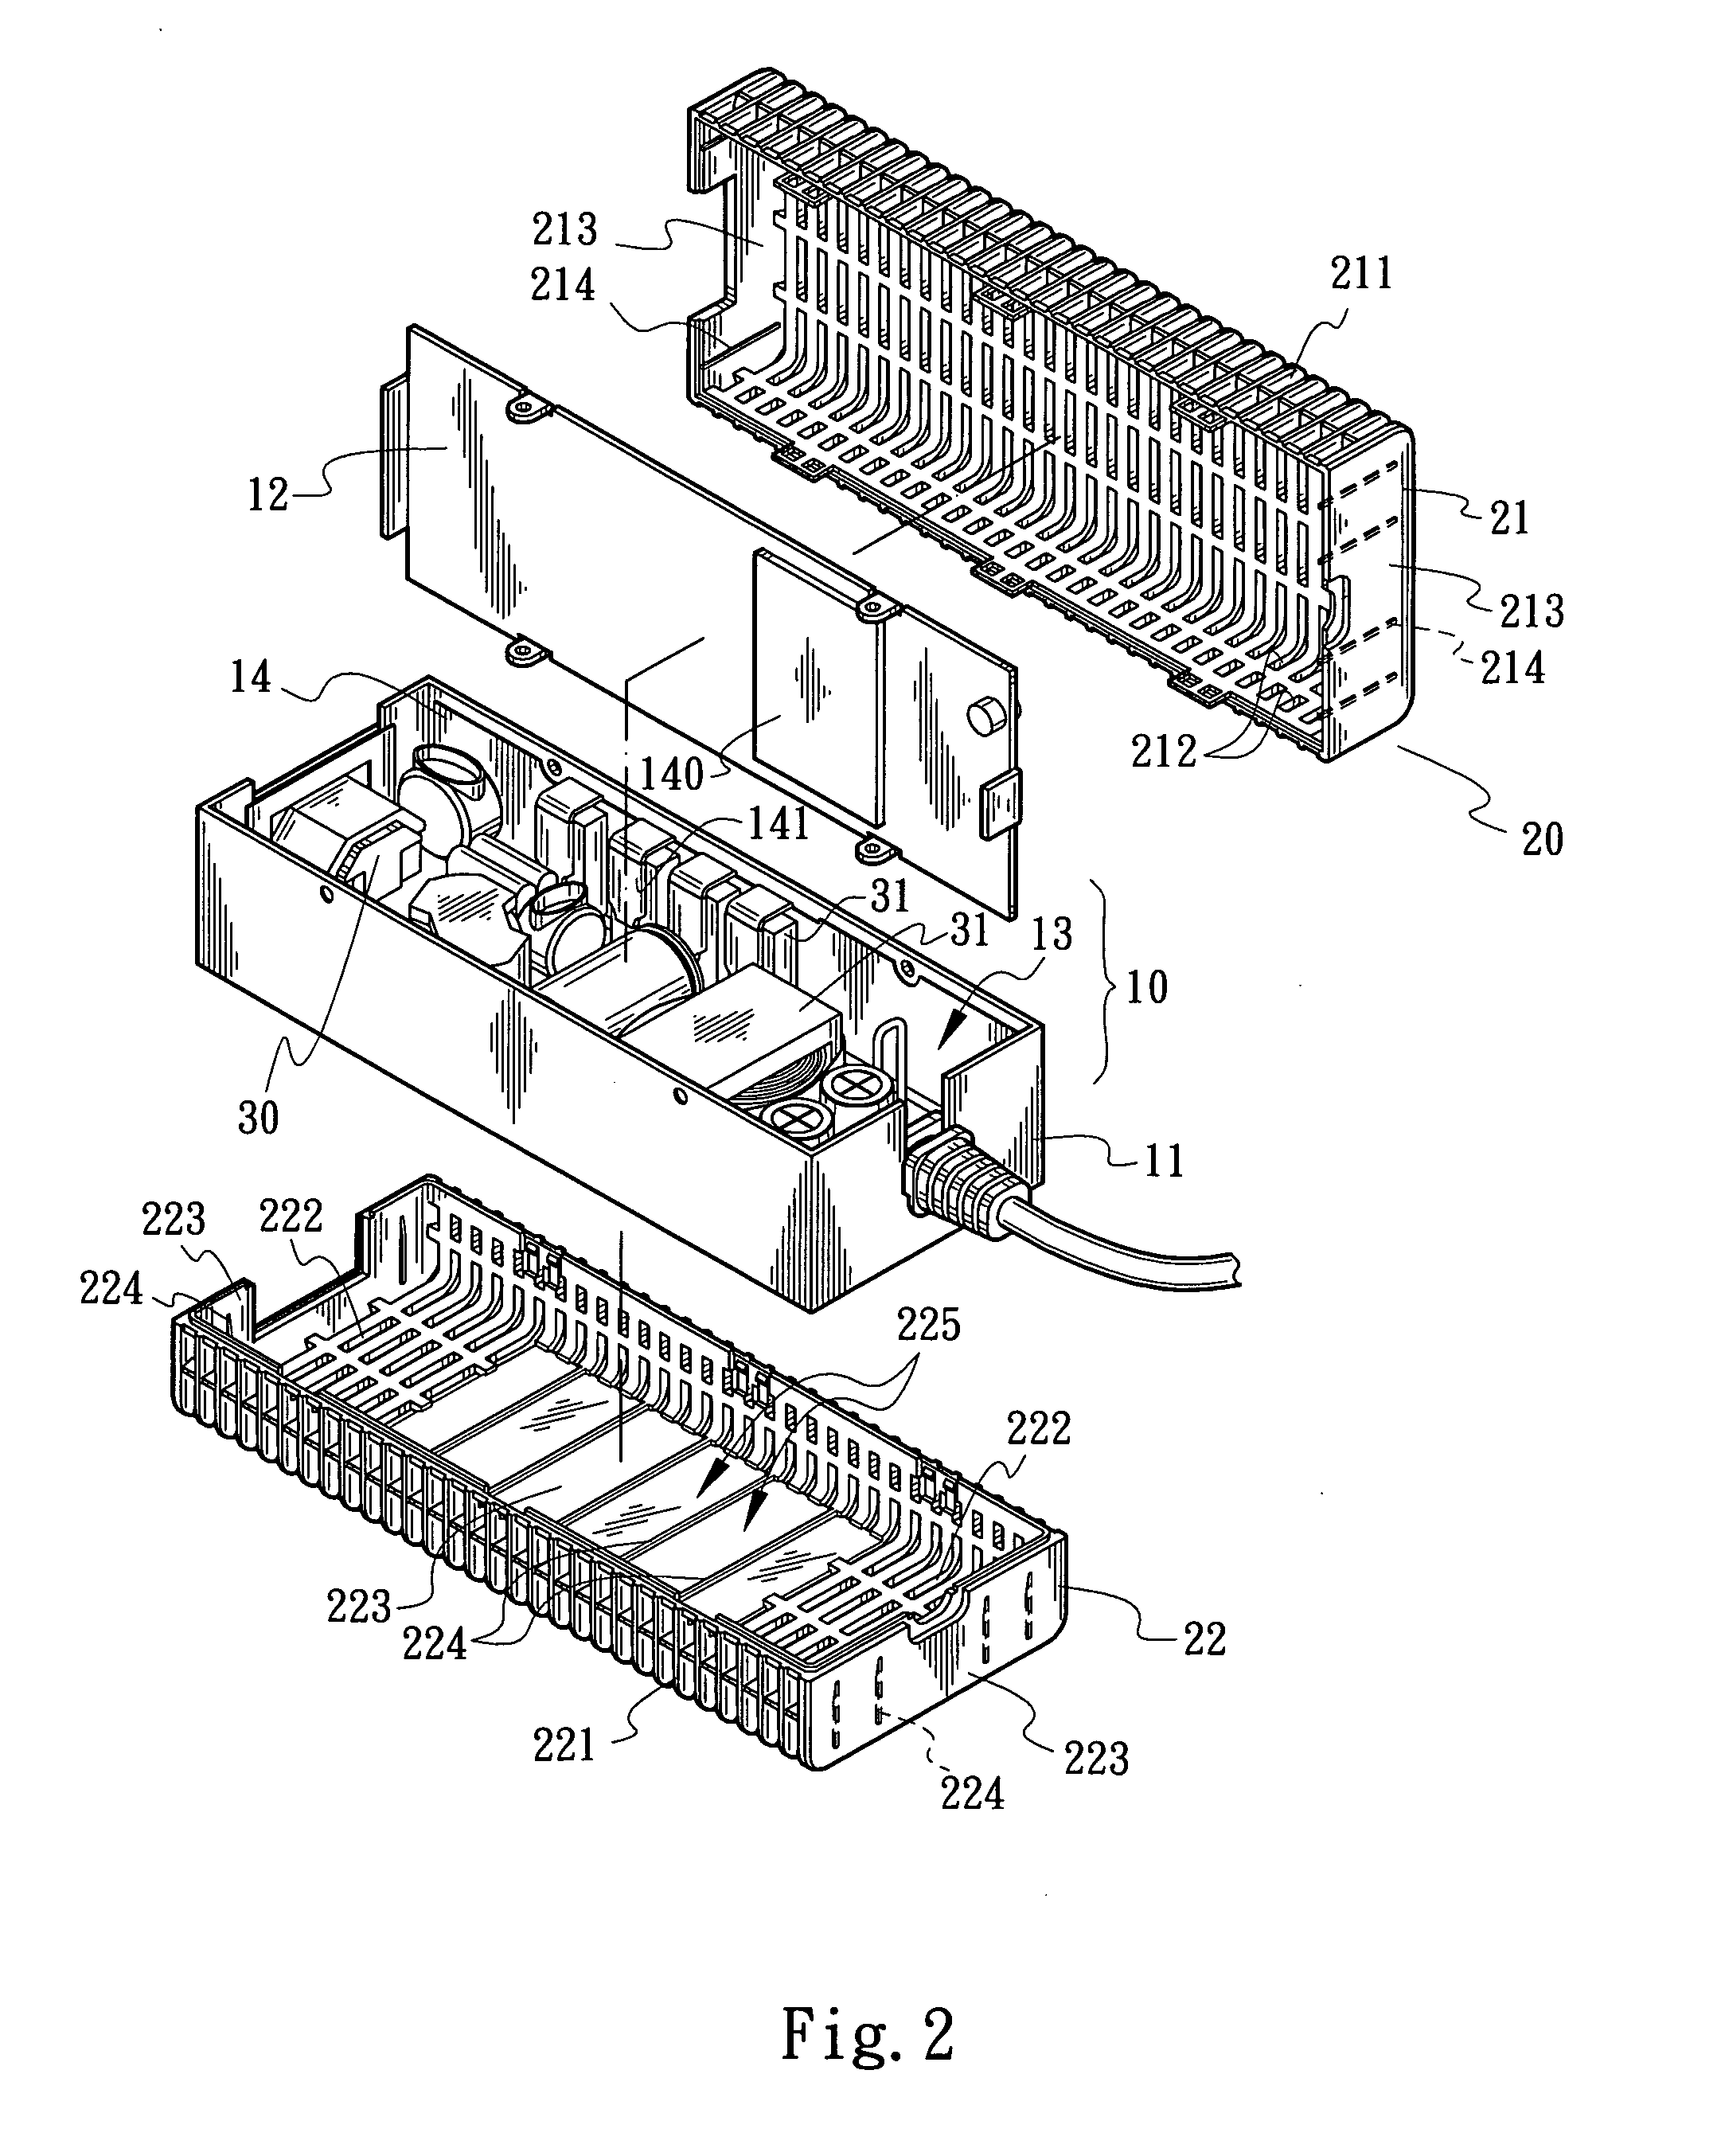 Heat sink structure for a power supply